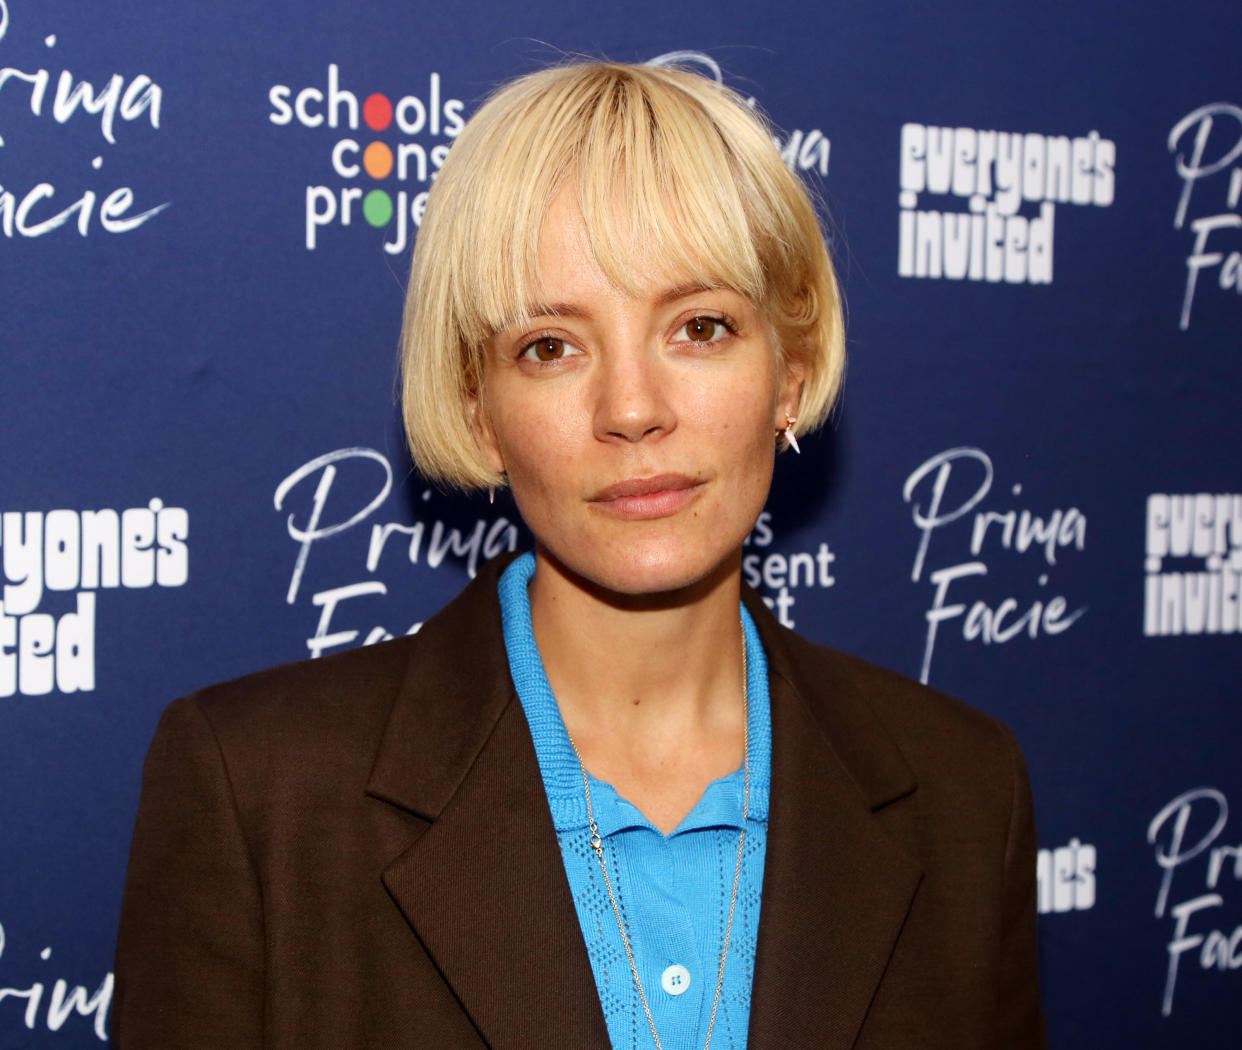 Lily Allen poses at the opening night of the new play 